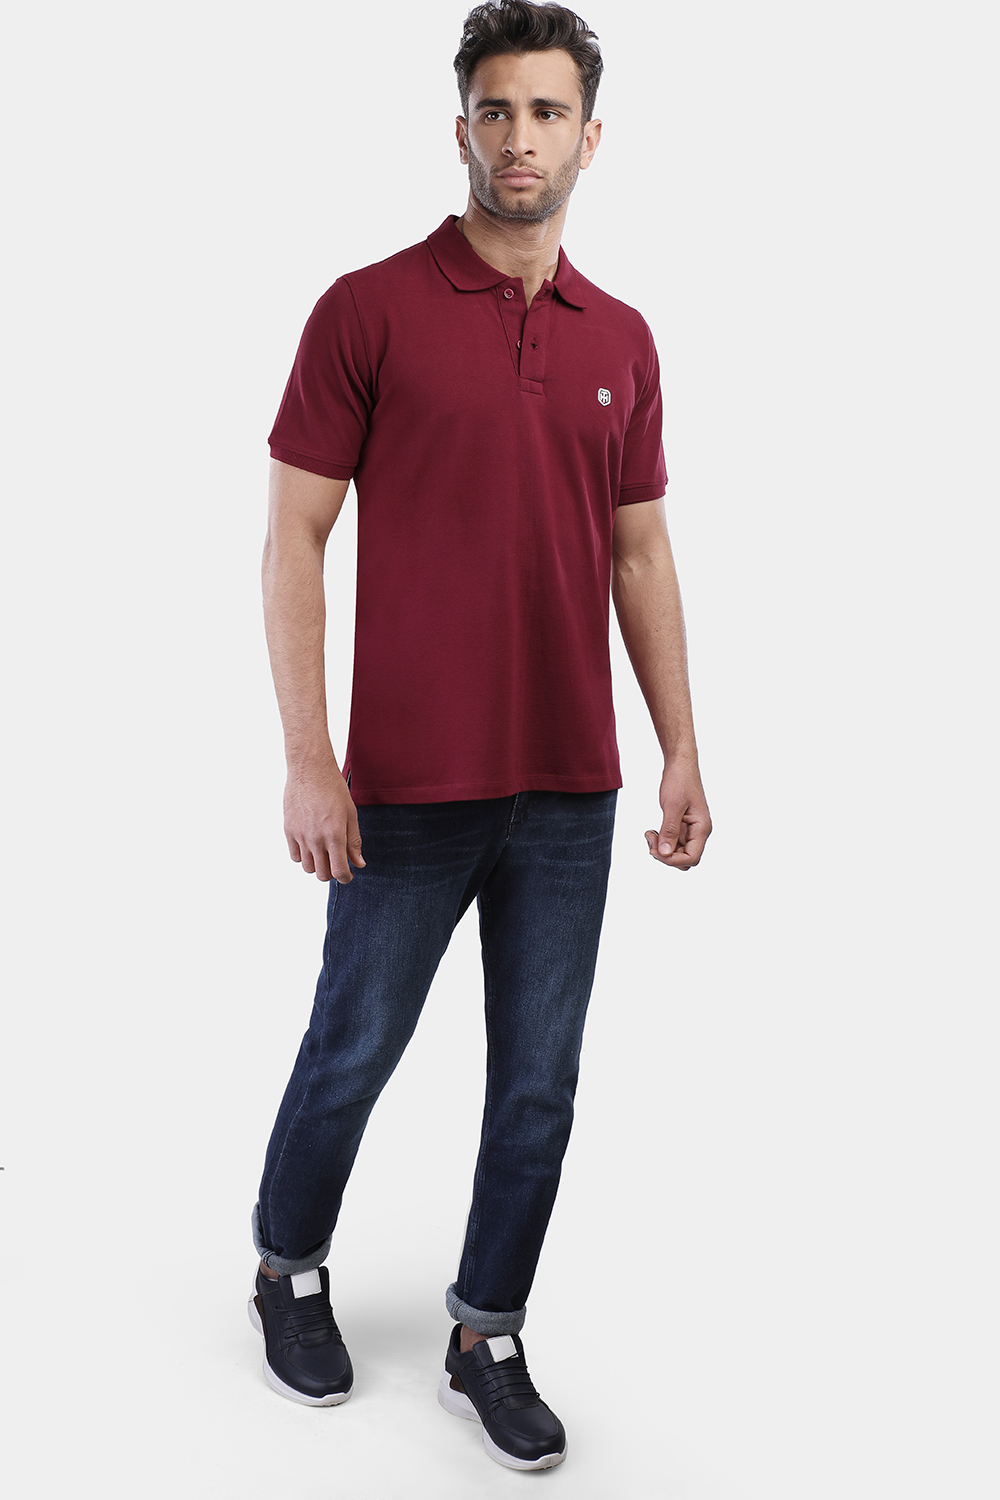 Polo Shirt New Fit Dark Red - TIE HOUSE